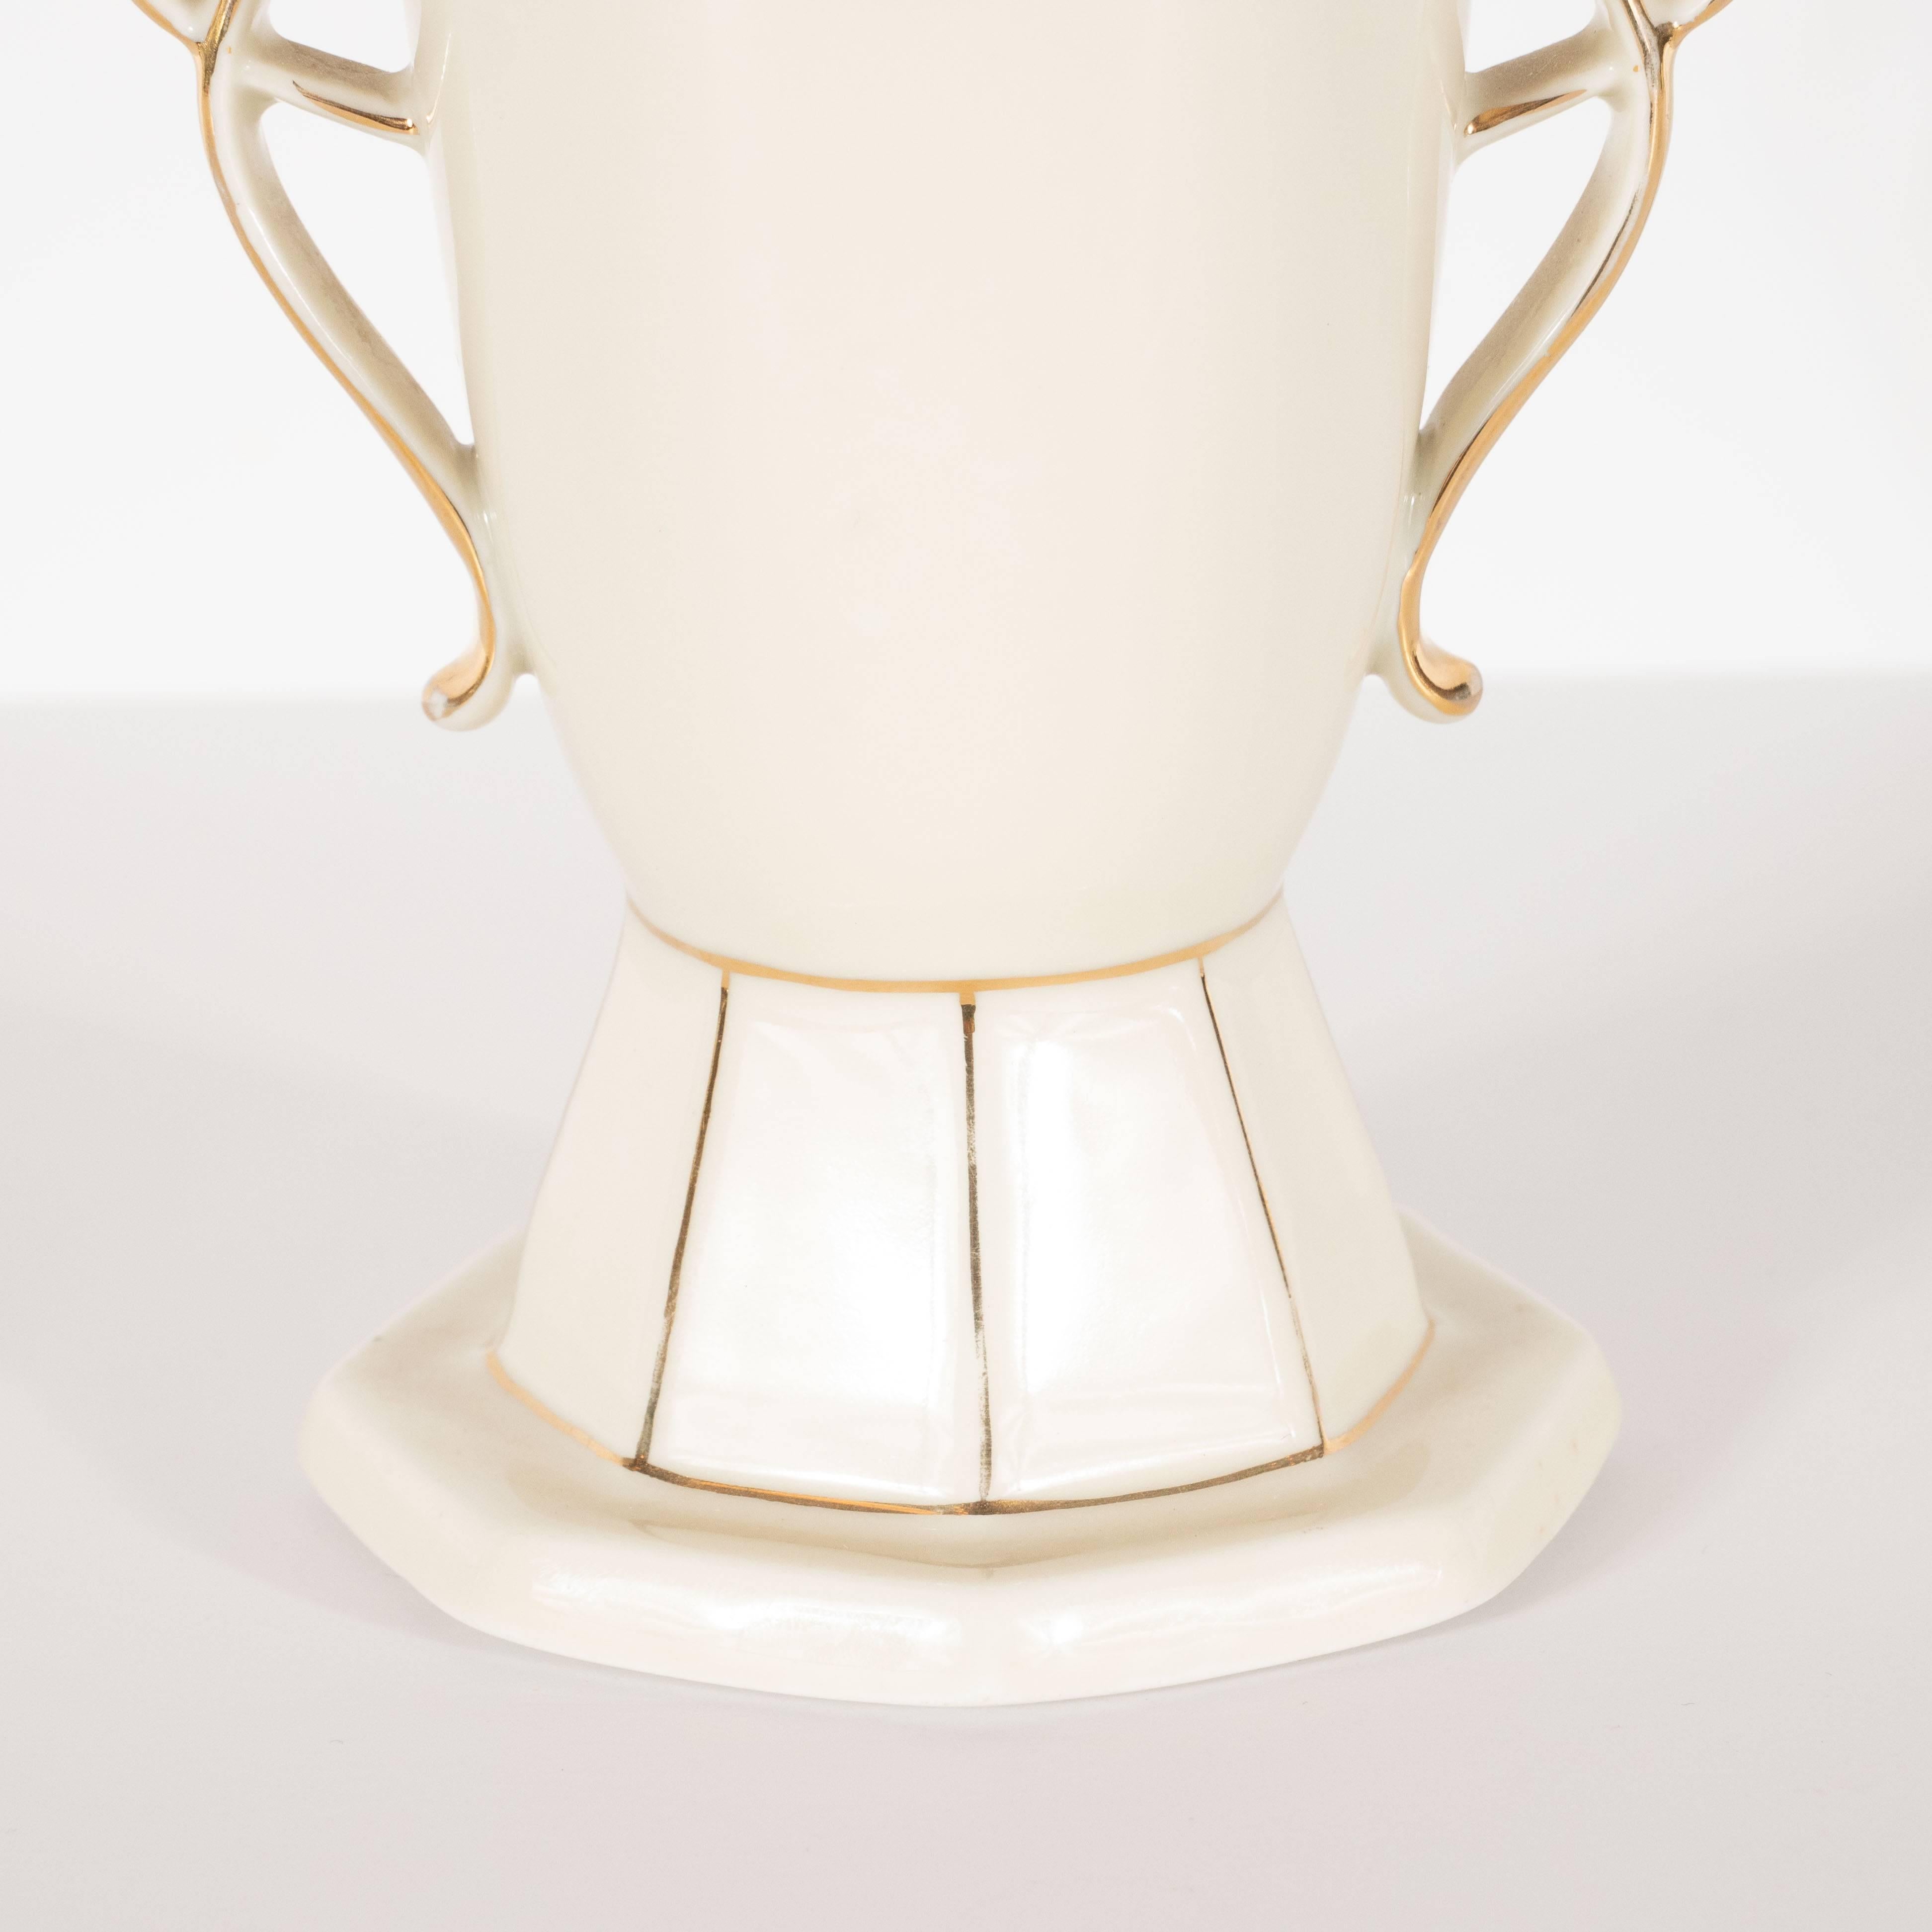 This stunning and dramatic vase was realized in Czechoslovakia- a country known for producing some of the finest quality glass and porcelain products of this era- circa 1930. It features an octagonal base that tapers upwards- the perimeter form of